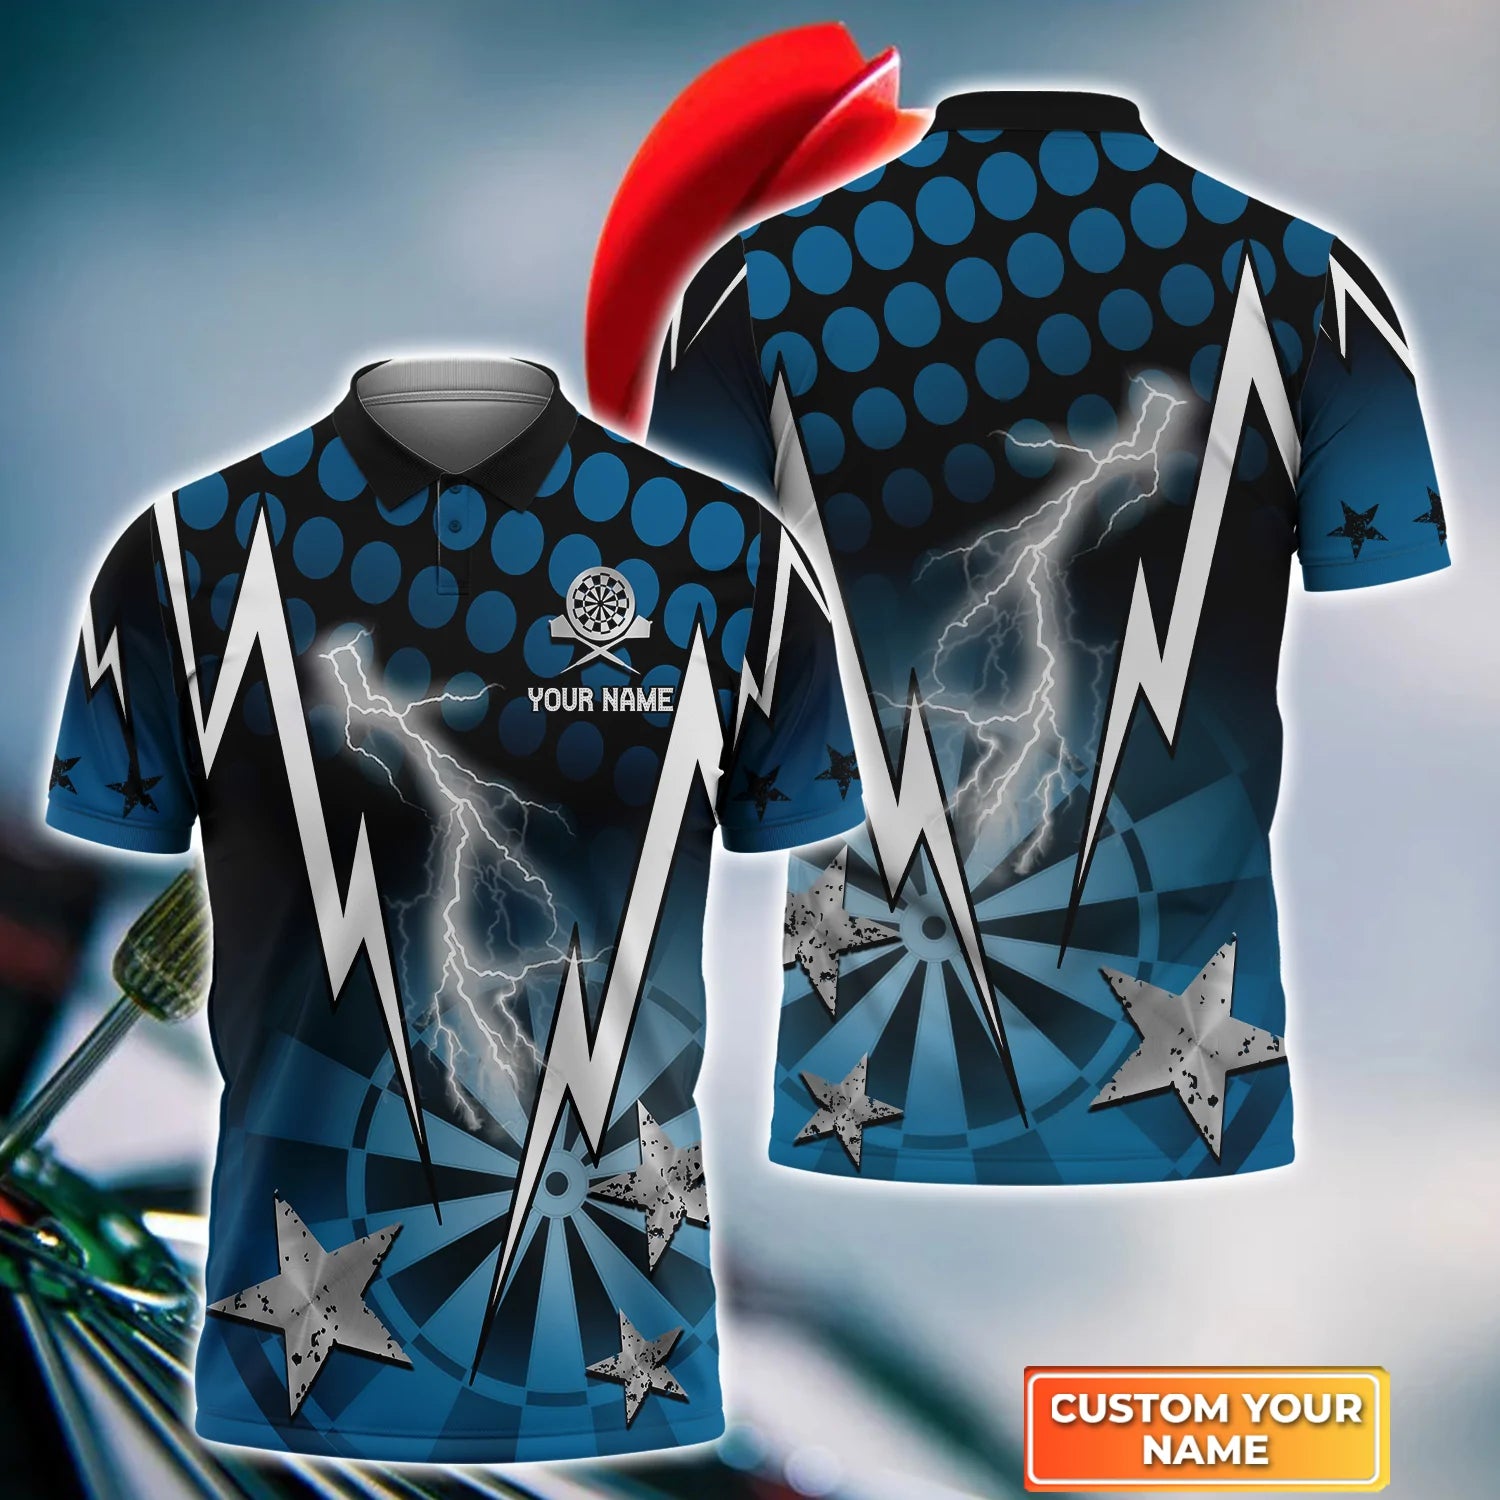 Personalized 3D Polo Shirt for Darts Enthusiasts: Blue Thunder and Lightning Design for Men’s and Team Dart Shirts – DP108